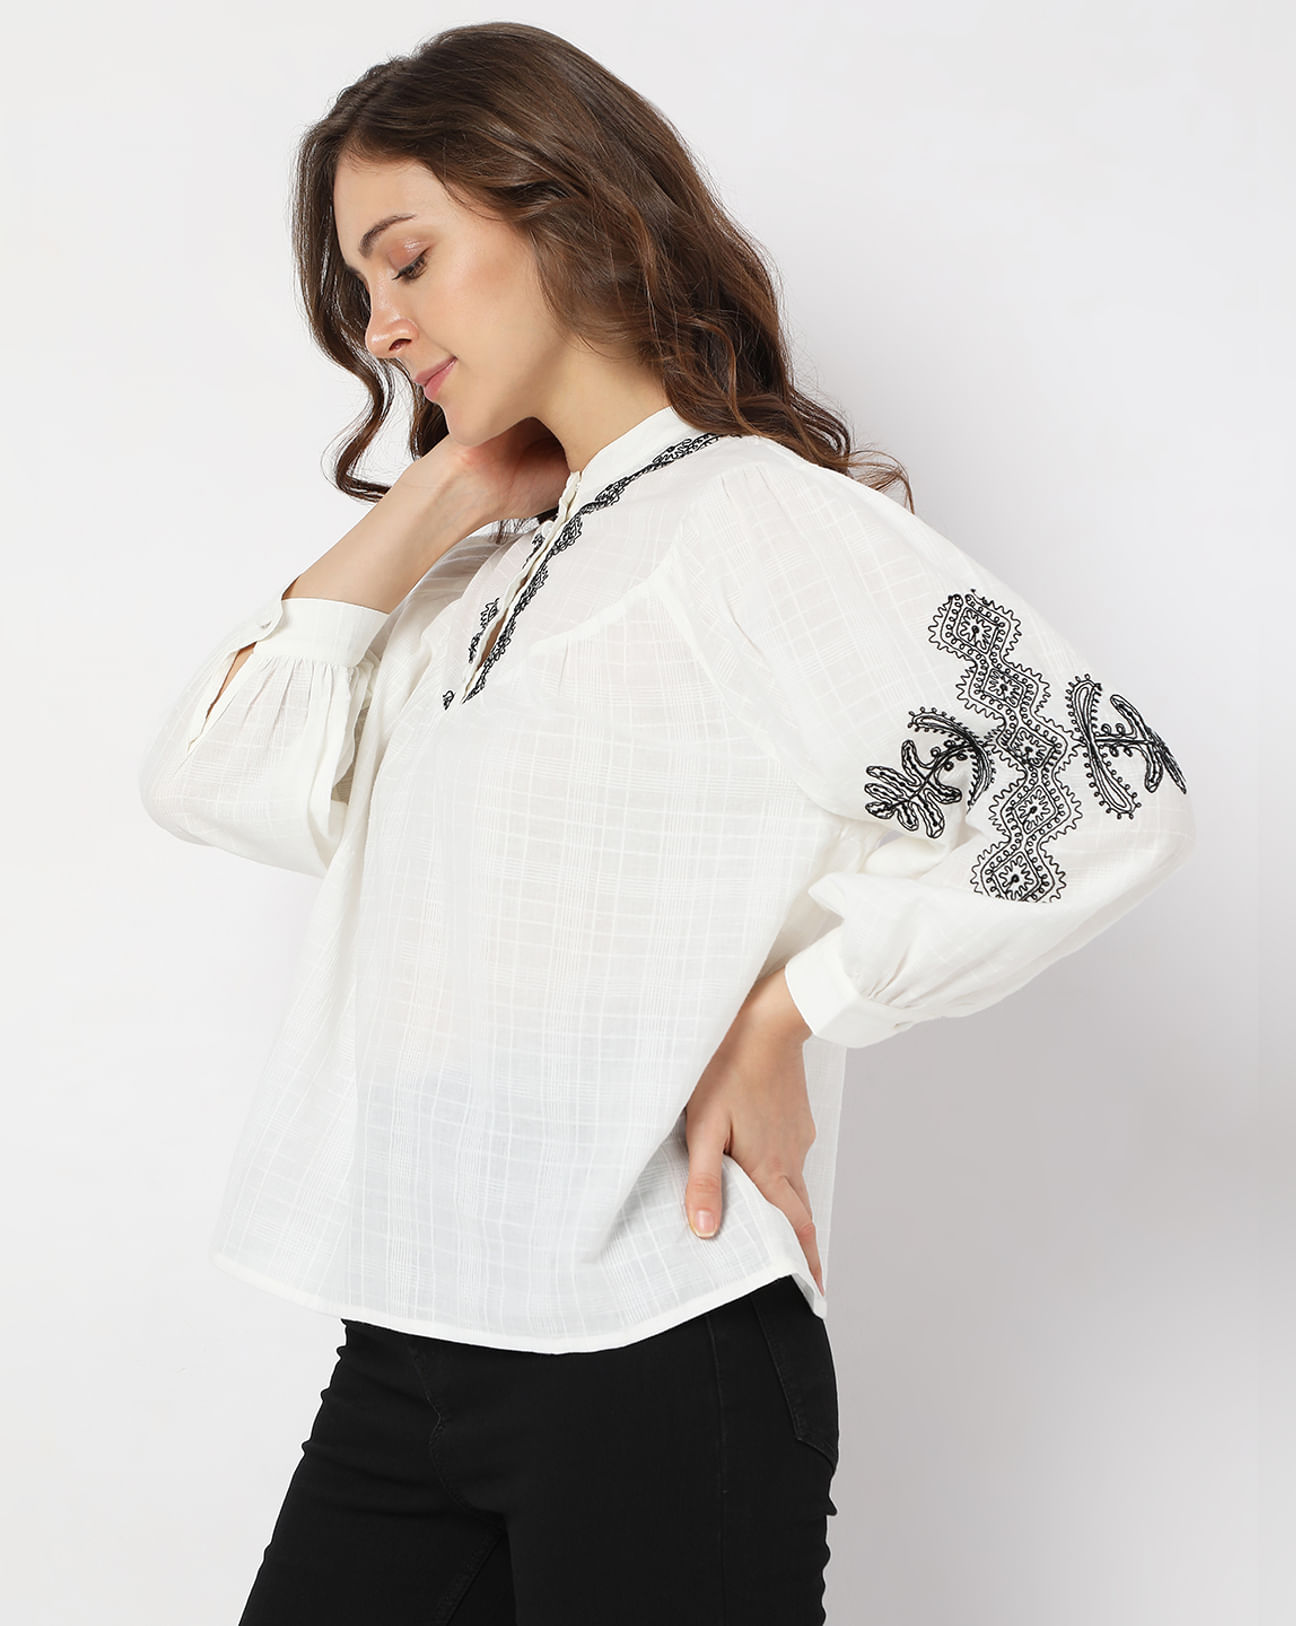 Buy White Cotton Embroidered Top For Women Online in India | VeroModa